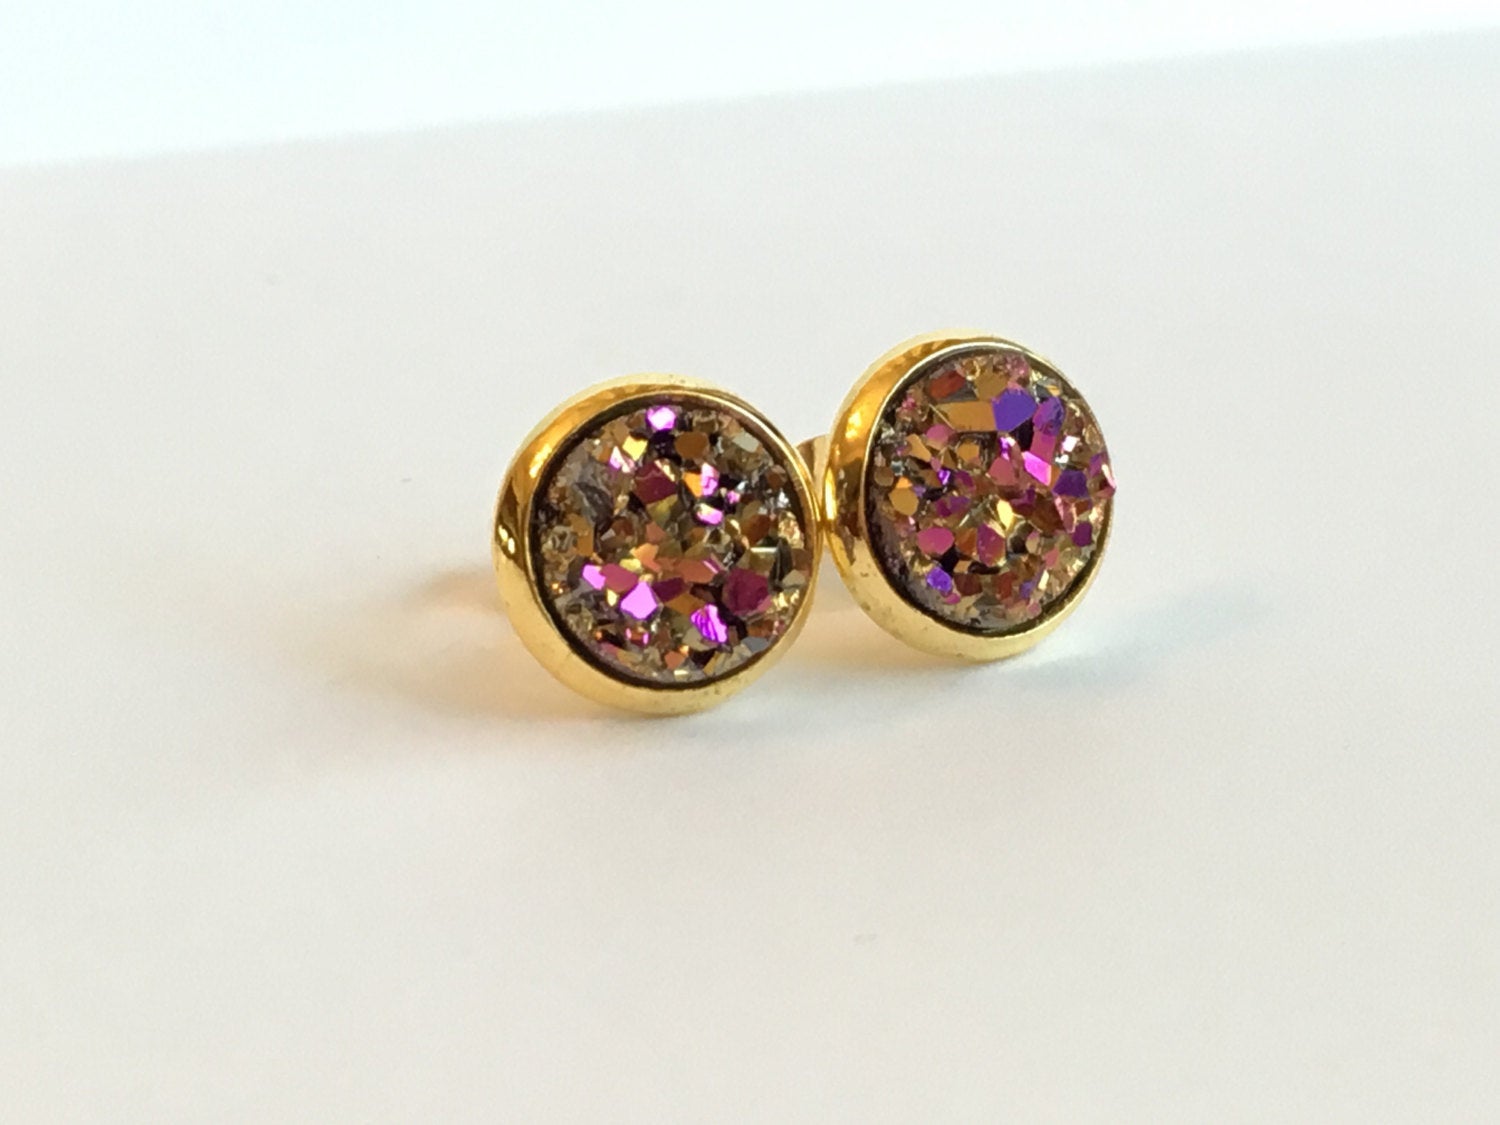 Angled view of Pink and gold resin druzy stone stud earrings set in a yellow gold color setting